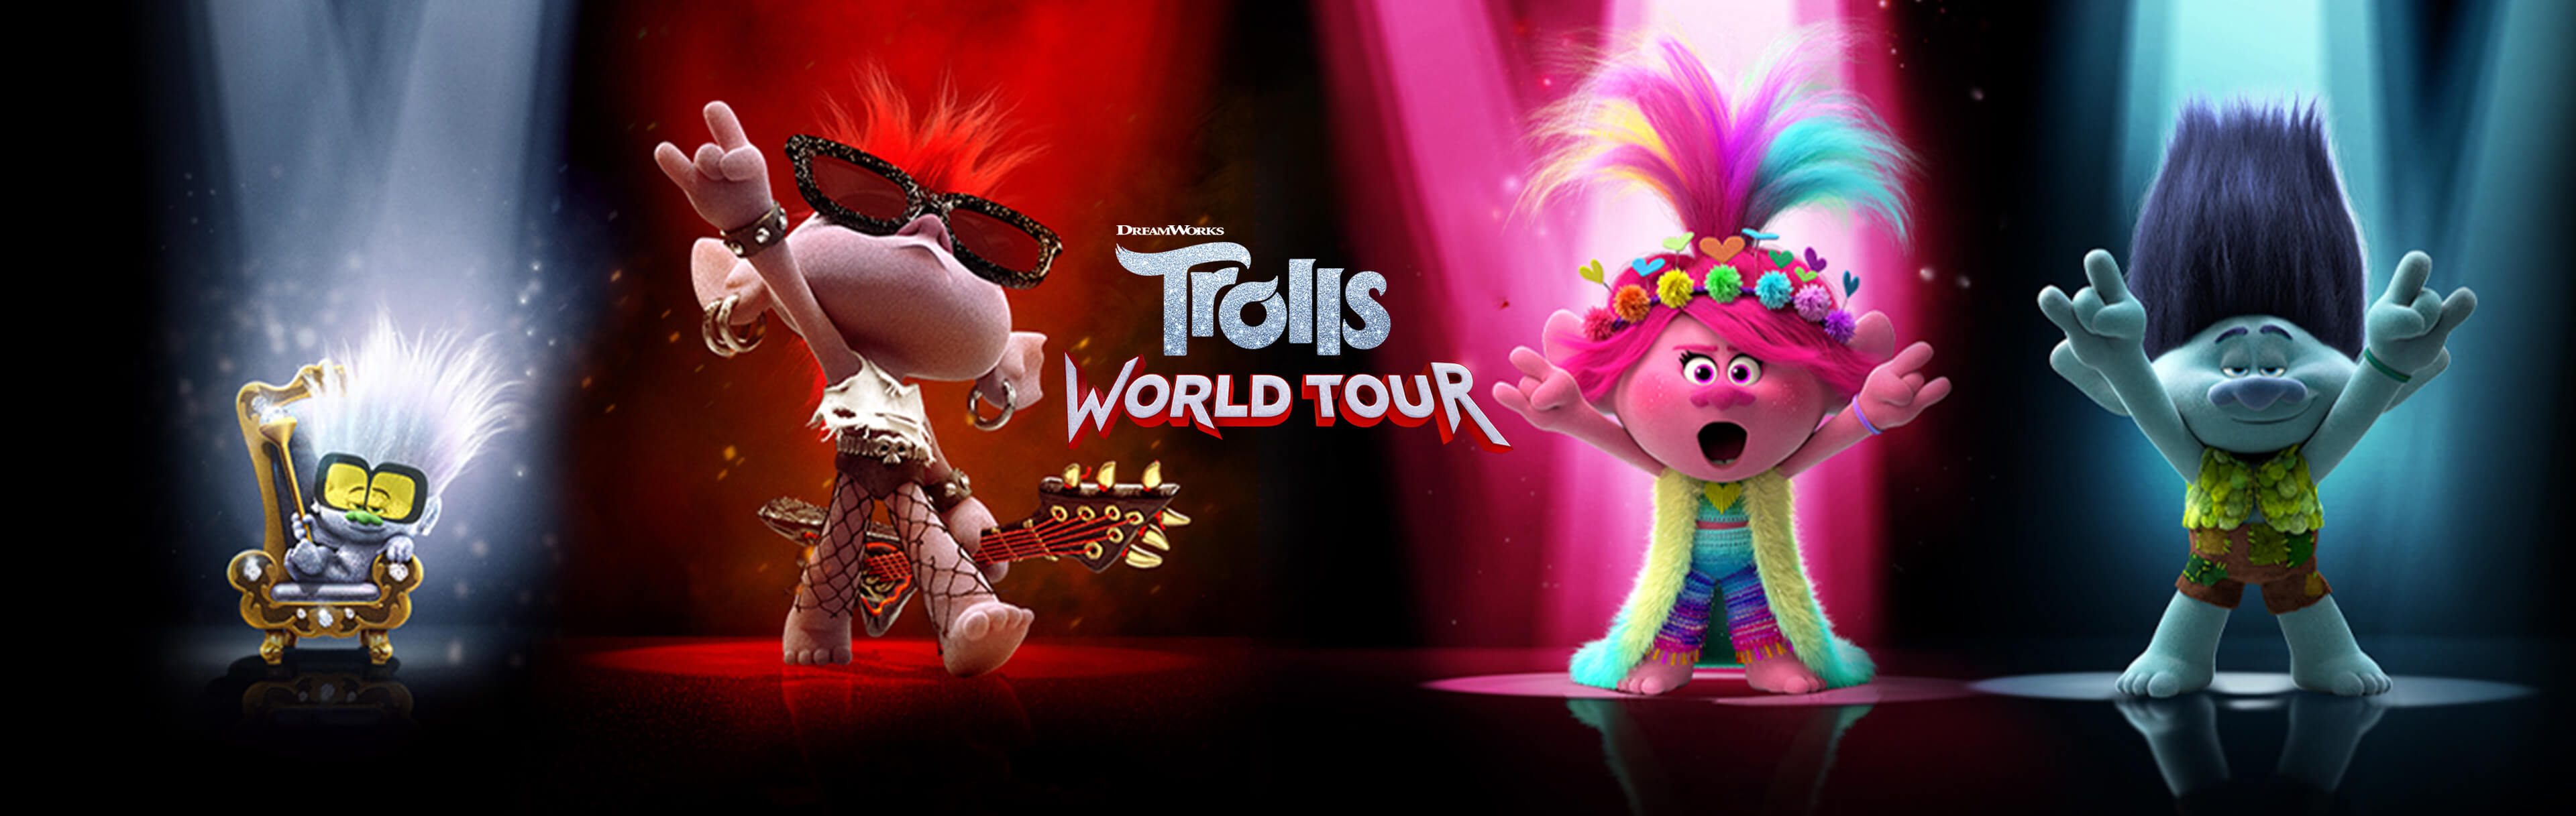 Trolls World Tour | Watch Now | Universal Pictures